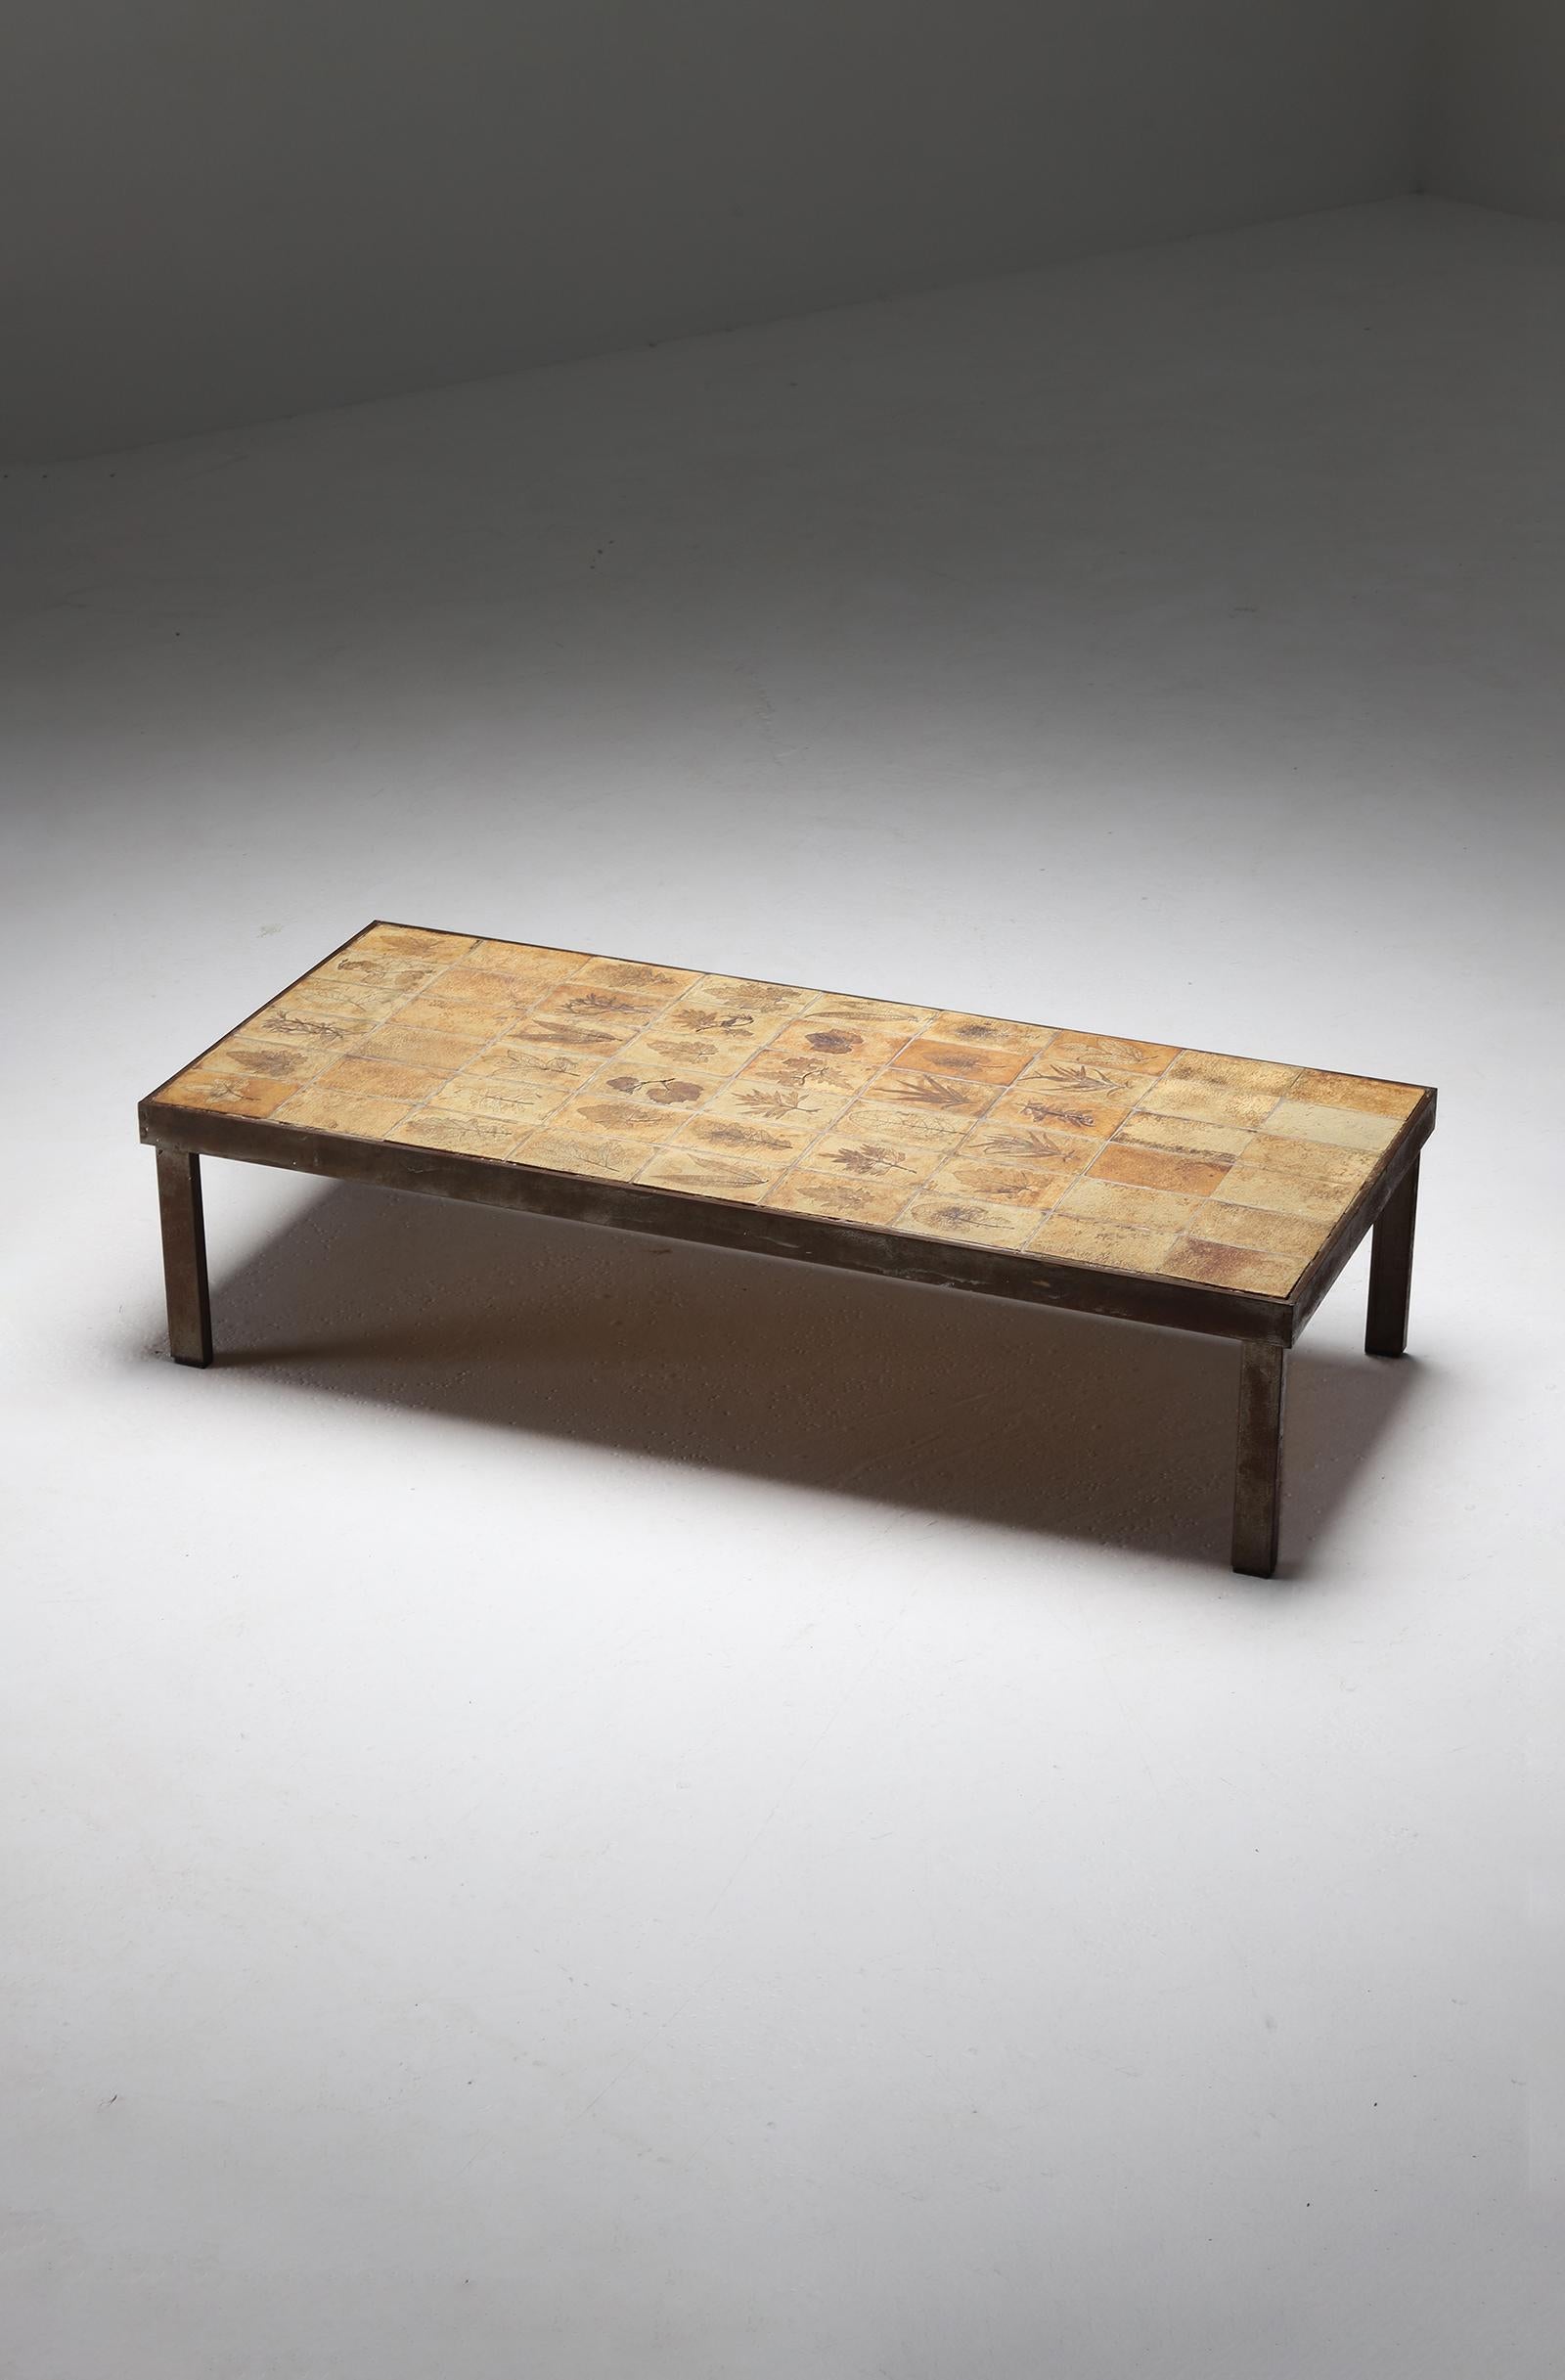 Modern ceramic coffee table by Roger Capron dating from the 1960s Vallauris, France.